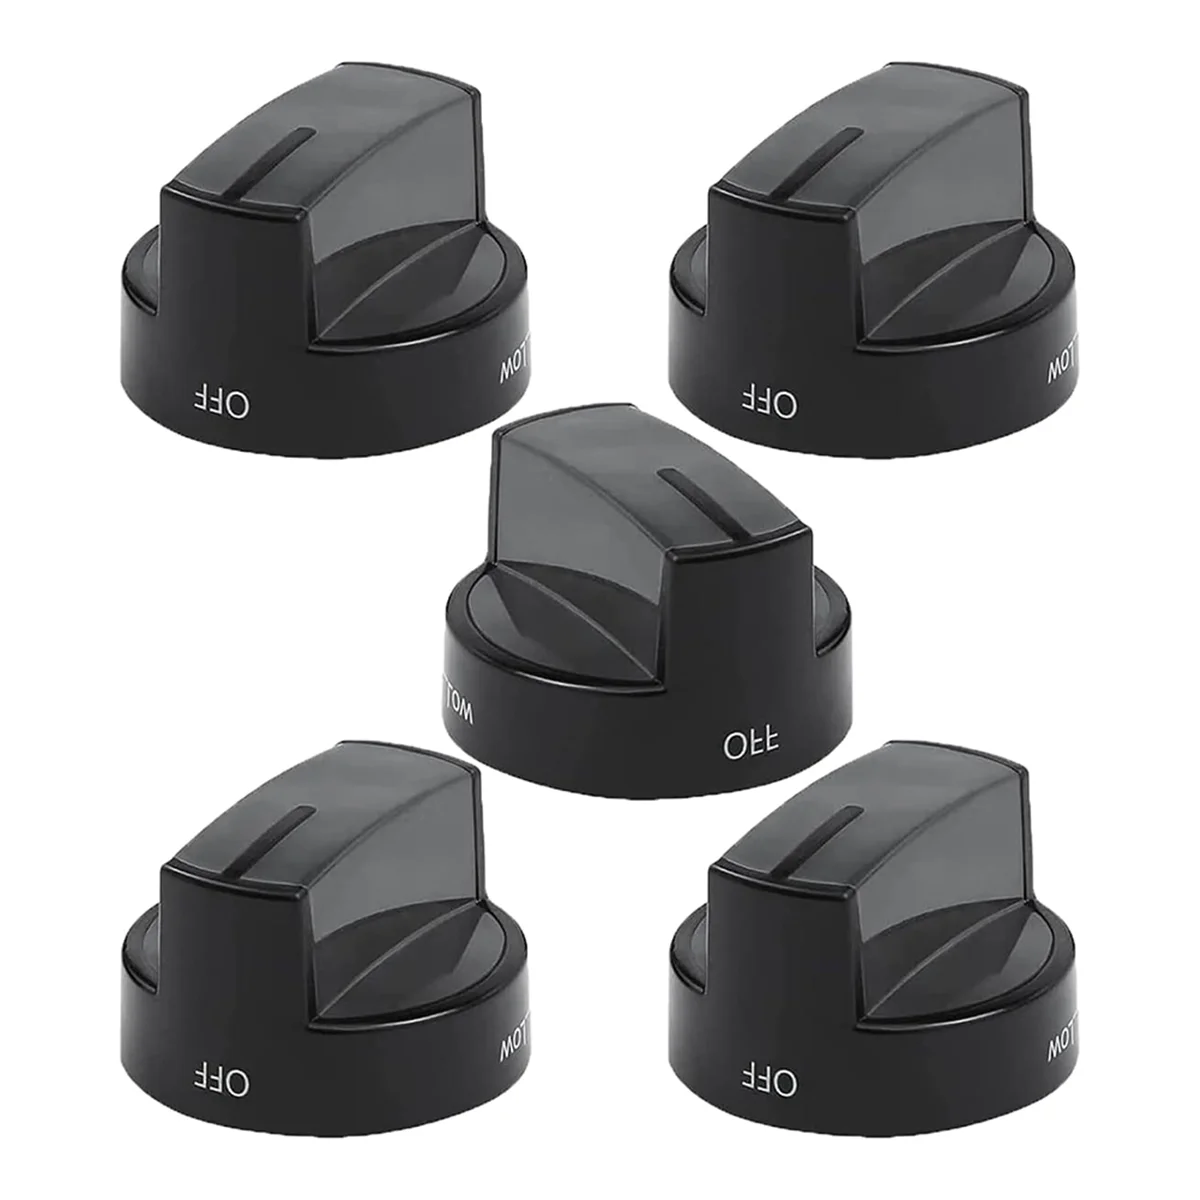 

W10339442 Stove Knobs (5 Pack) Fit for Whirl-Pool Gas Range Stove WFG524SLAS2, WFG524SLAW0, Replace PD00004340, 2311008